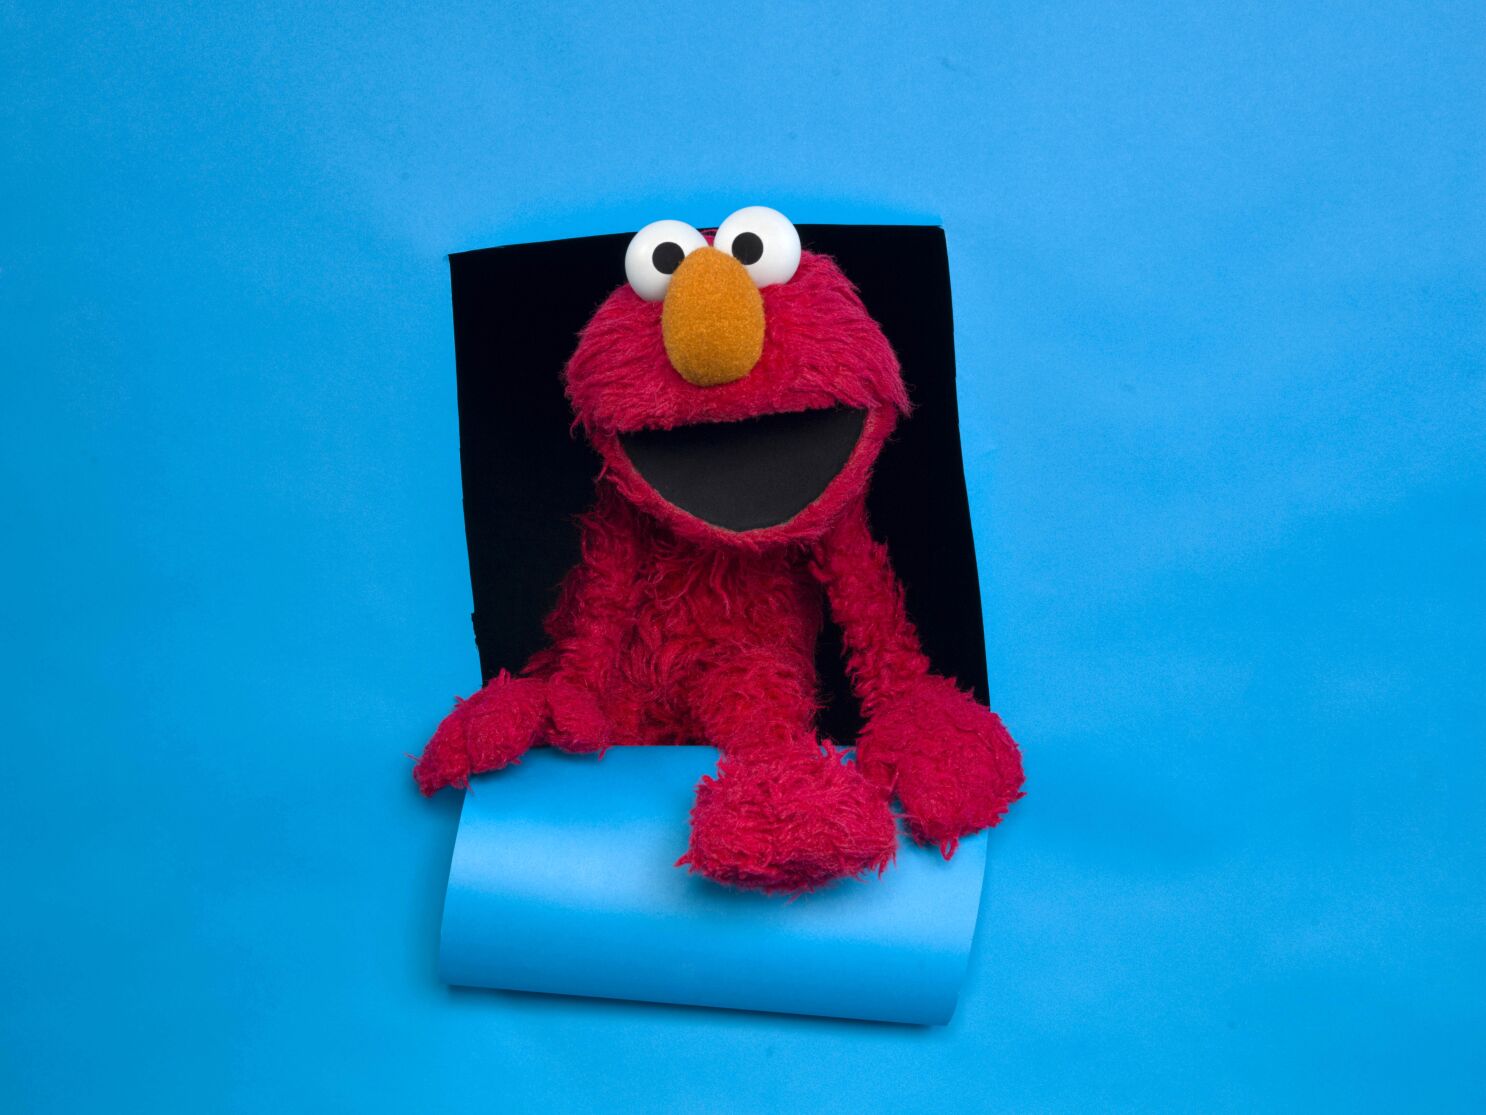 Why Elmo's feud with a rock has gone viral on Twitter - Los Angeles Times